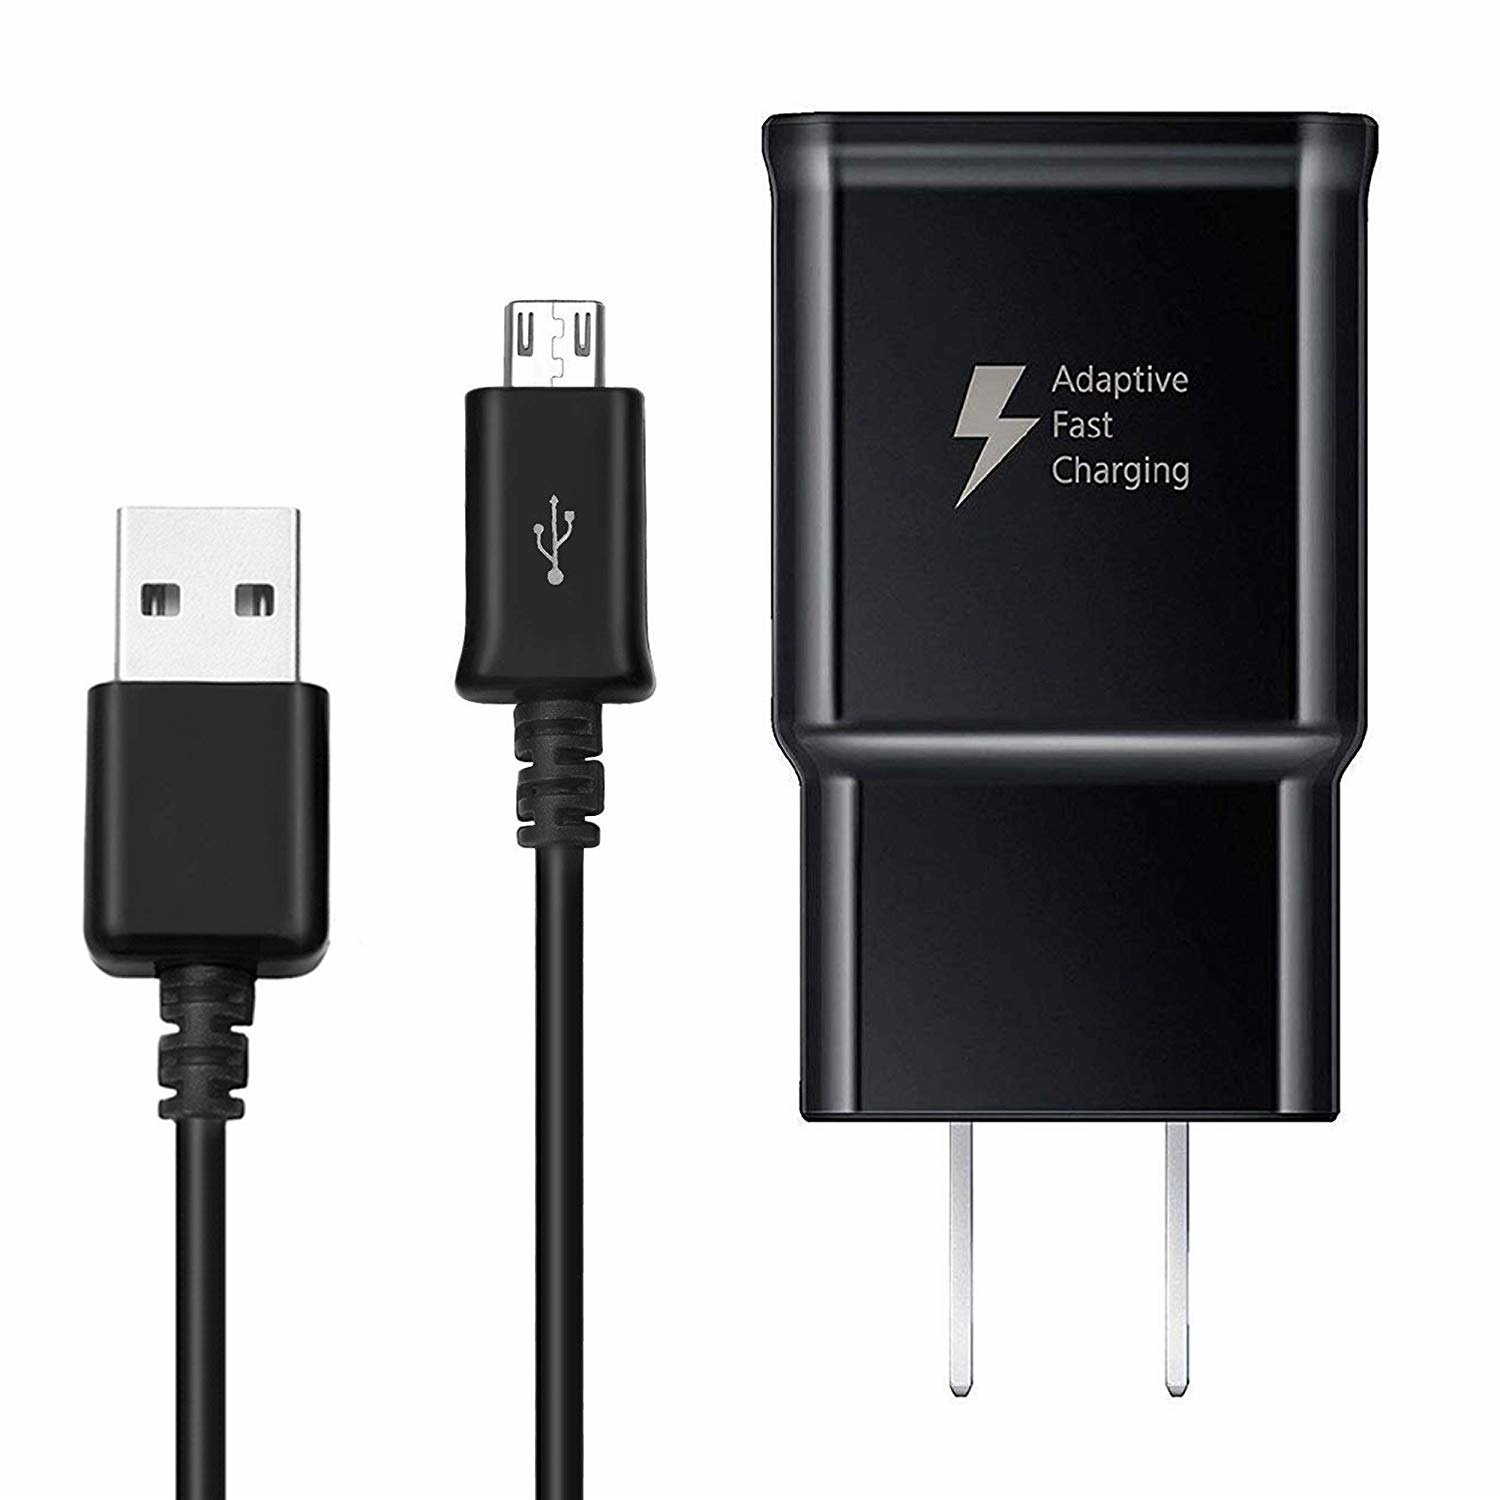 Kyocera DuraForce XD Adaptive Fast Charger Micro USB 2.0 Charging Kit [1  Wall Charger FT Micro USB Cable] Dual voltages for up to 60% Faster  Charging! Black Walmart Canada